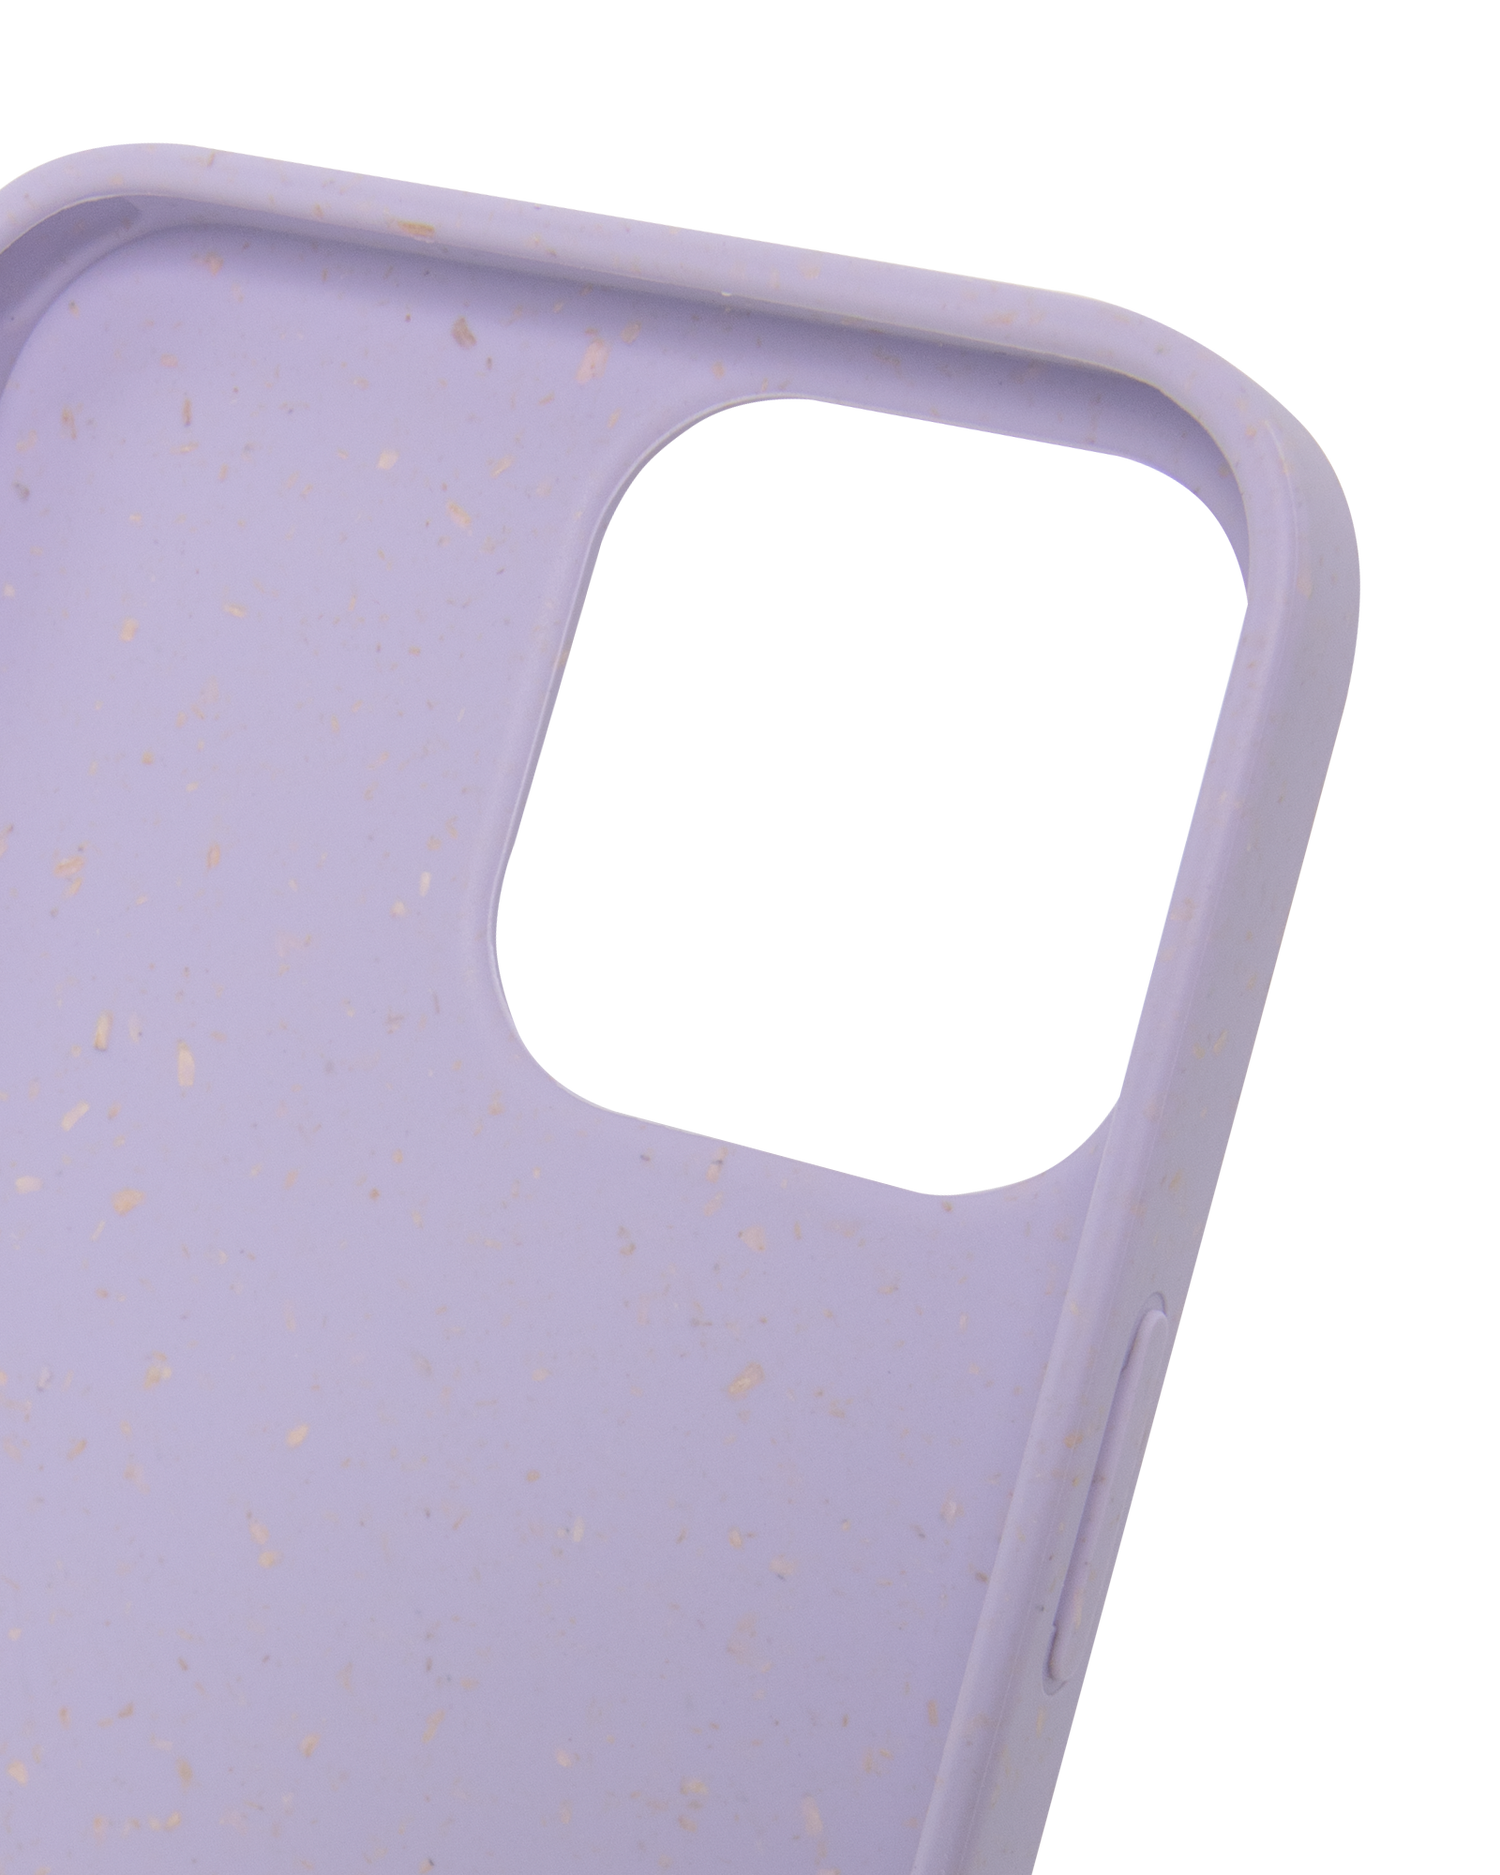 Purple Eco-Friendly Phone Case for Apple iPhone 12 Pro Max: Details inside